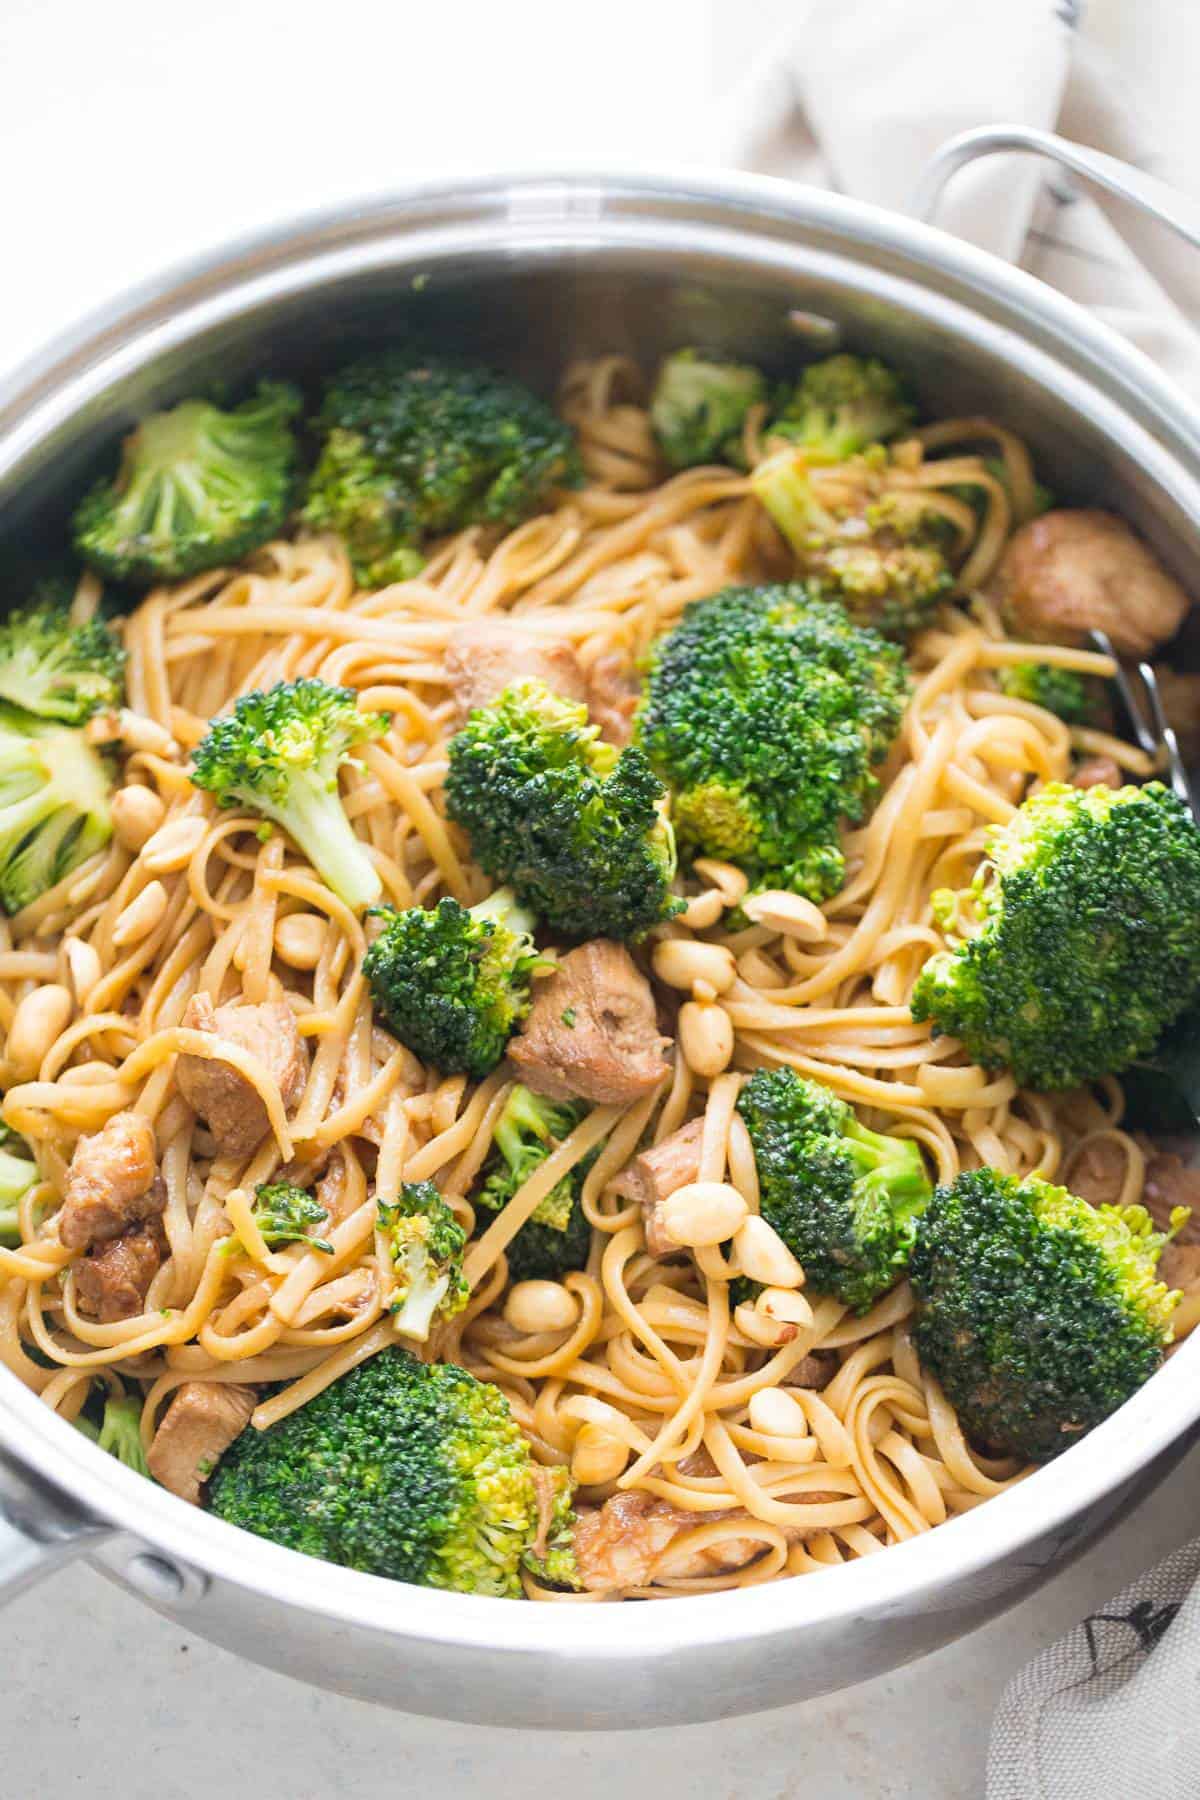 Chicken and broccoli are stir fried together in a simple marinade and then served with peanut butter noodles!